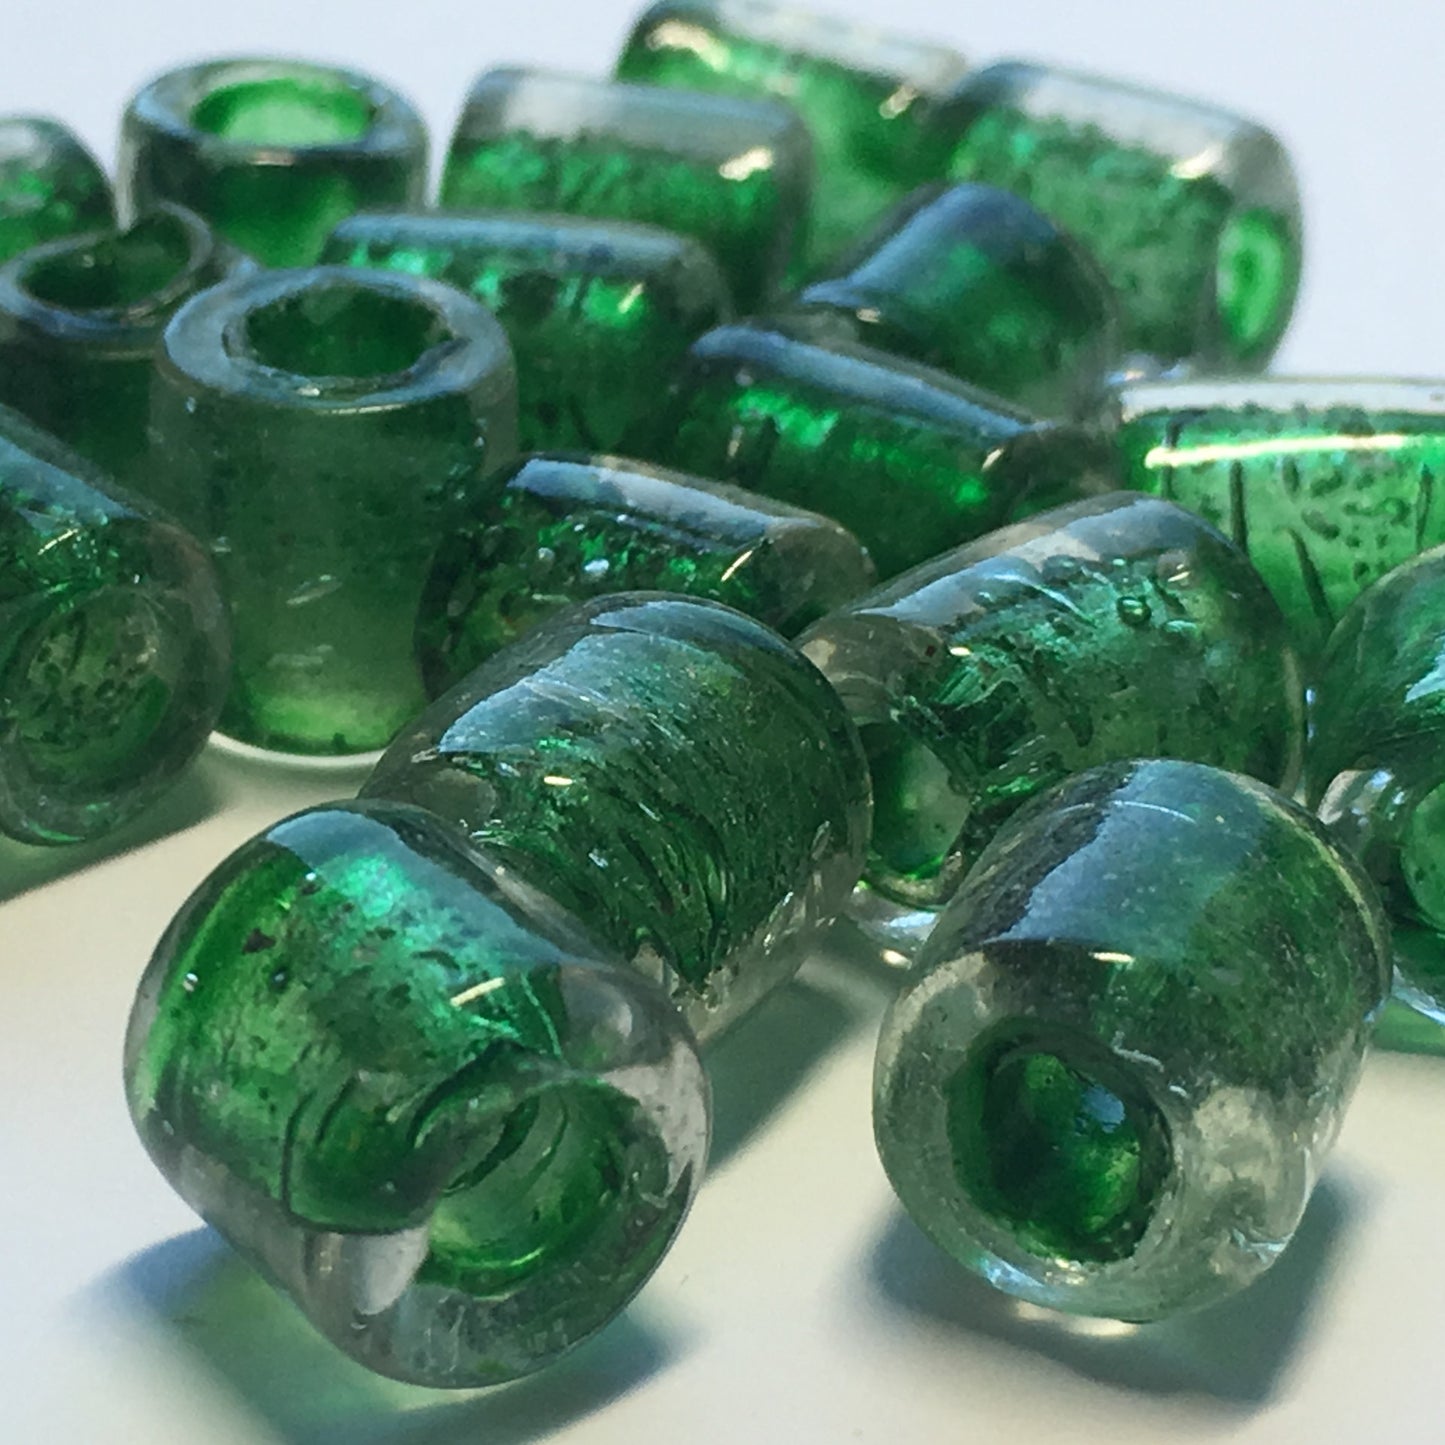 Clear Glass Green Color Lined Lampwork Roller Beads, Average 9 x 7.5 mm - 23 Beads